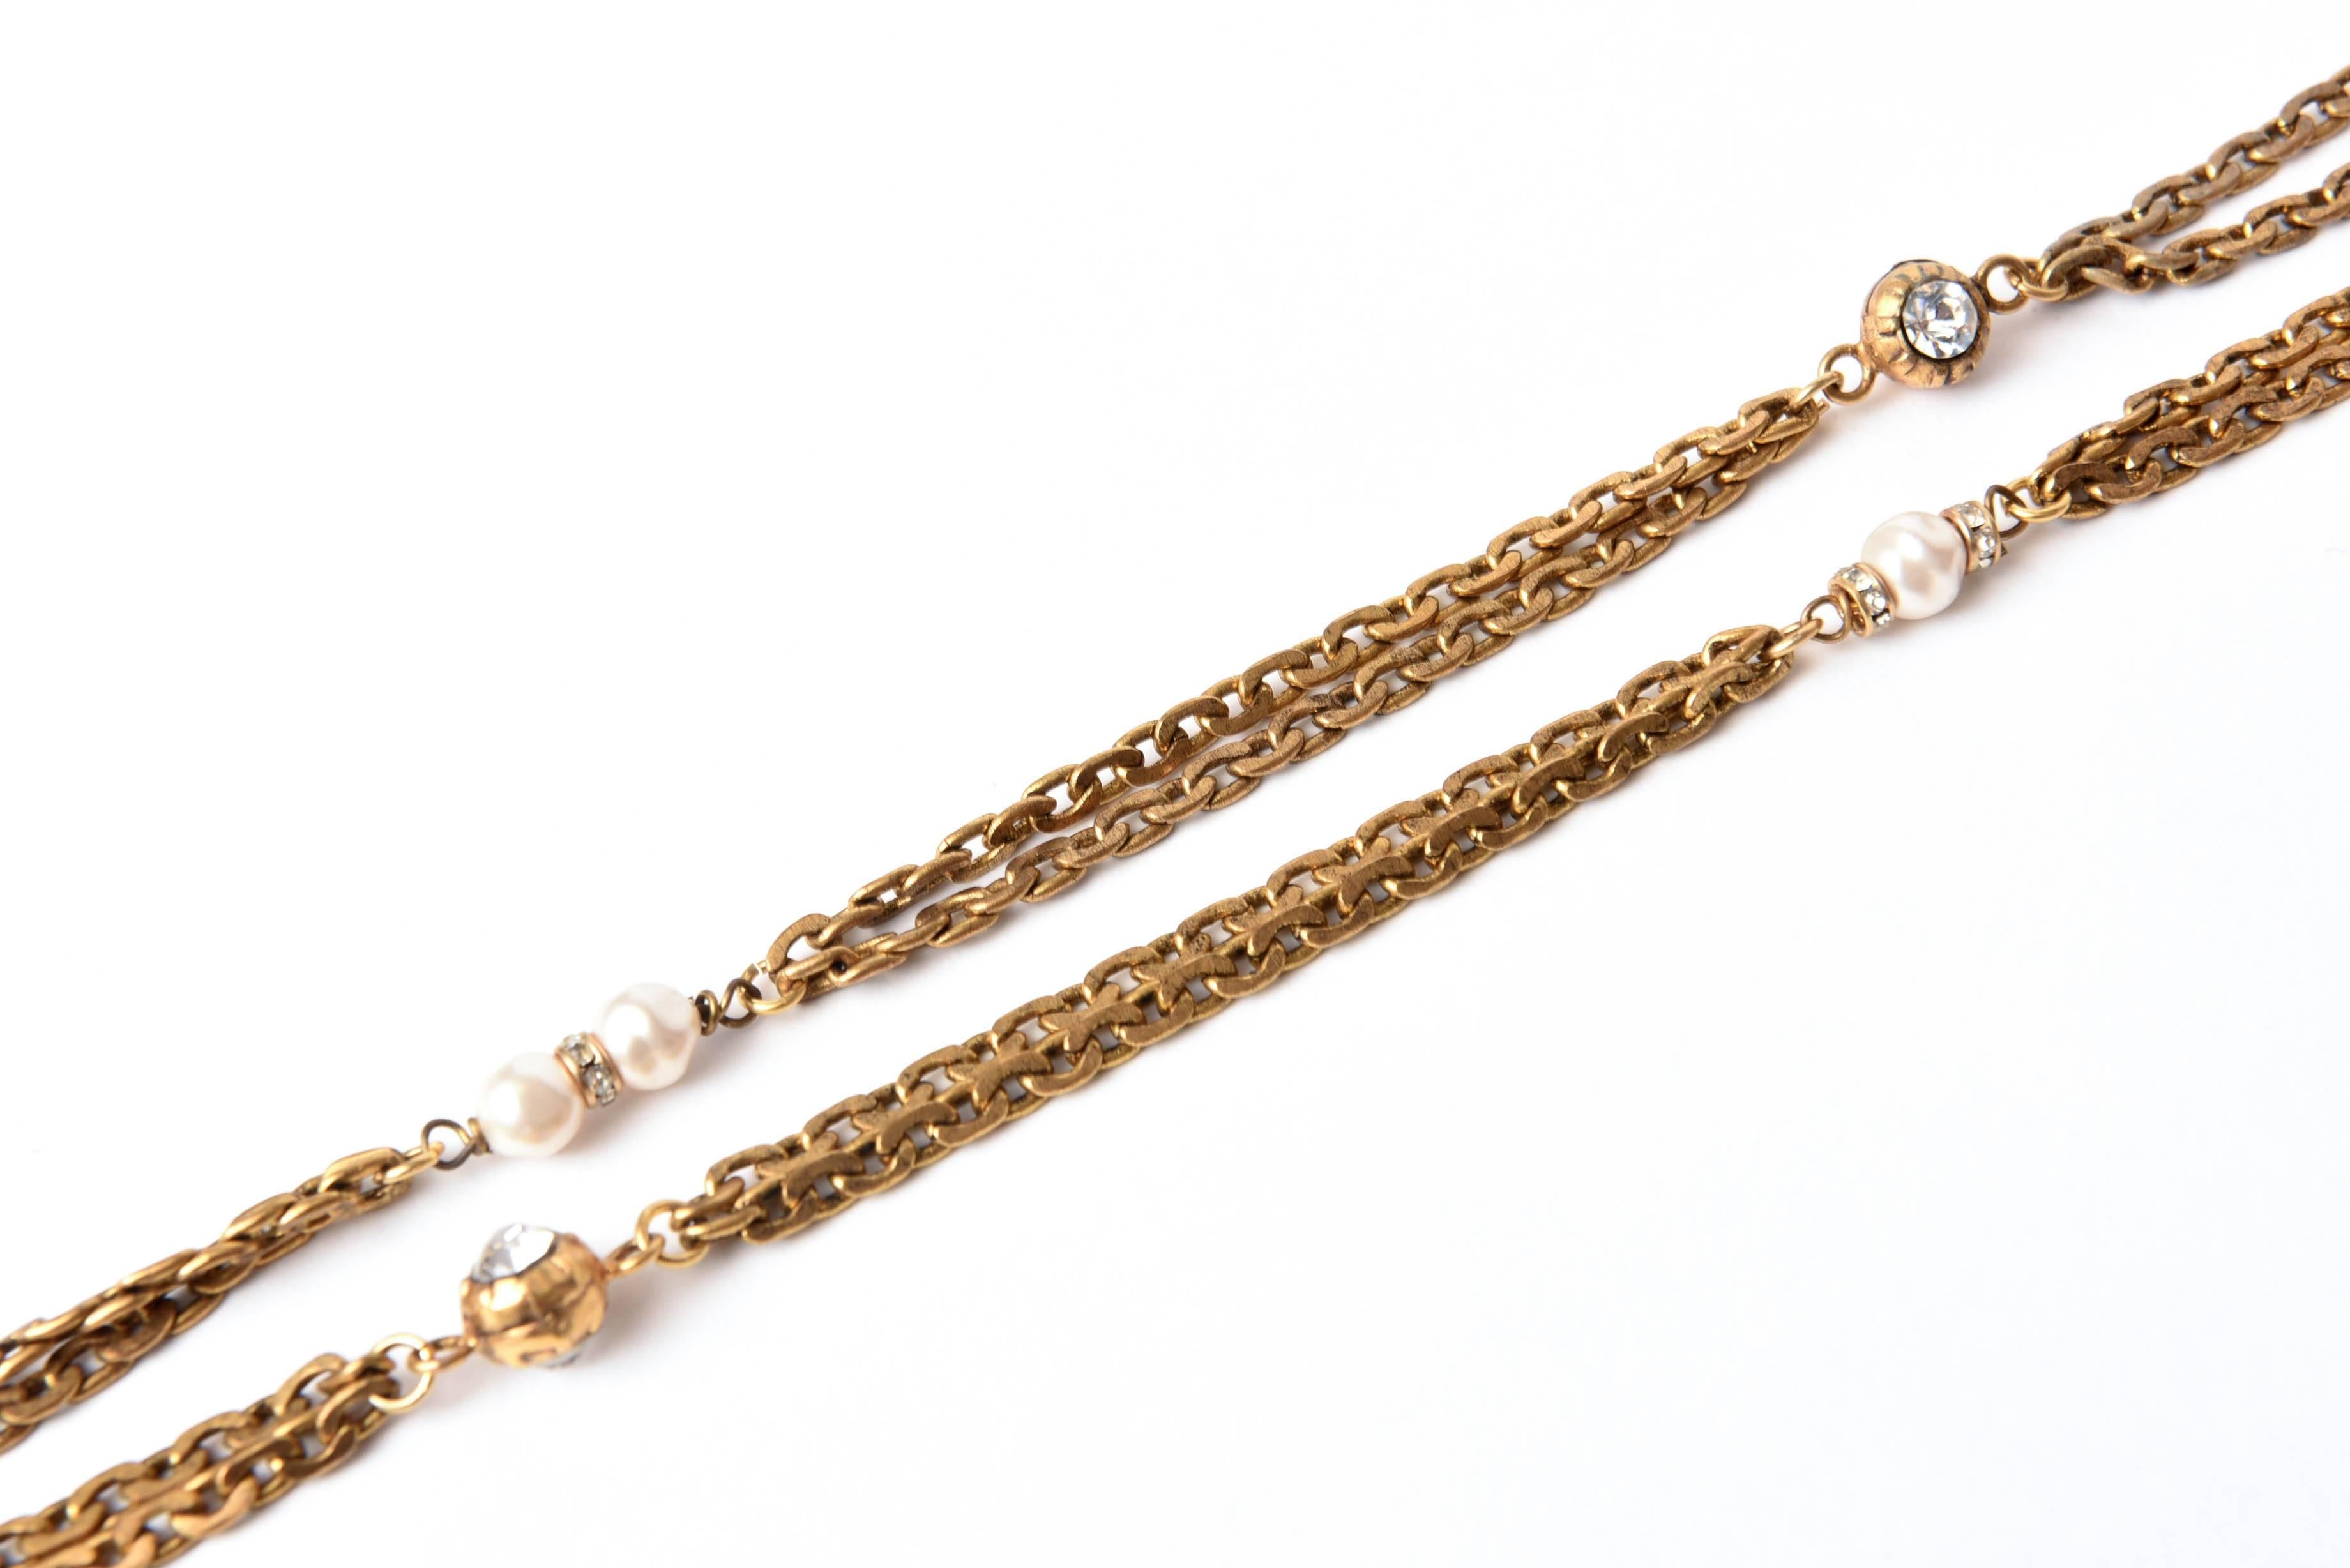 French Vintage Chanel Necklace, Faux Pearl, Long and Impressive